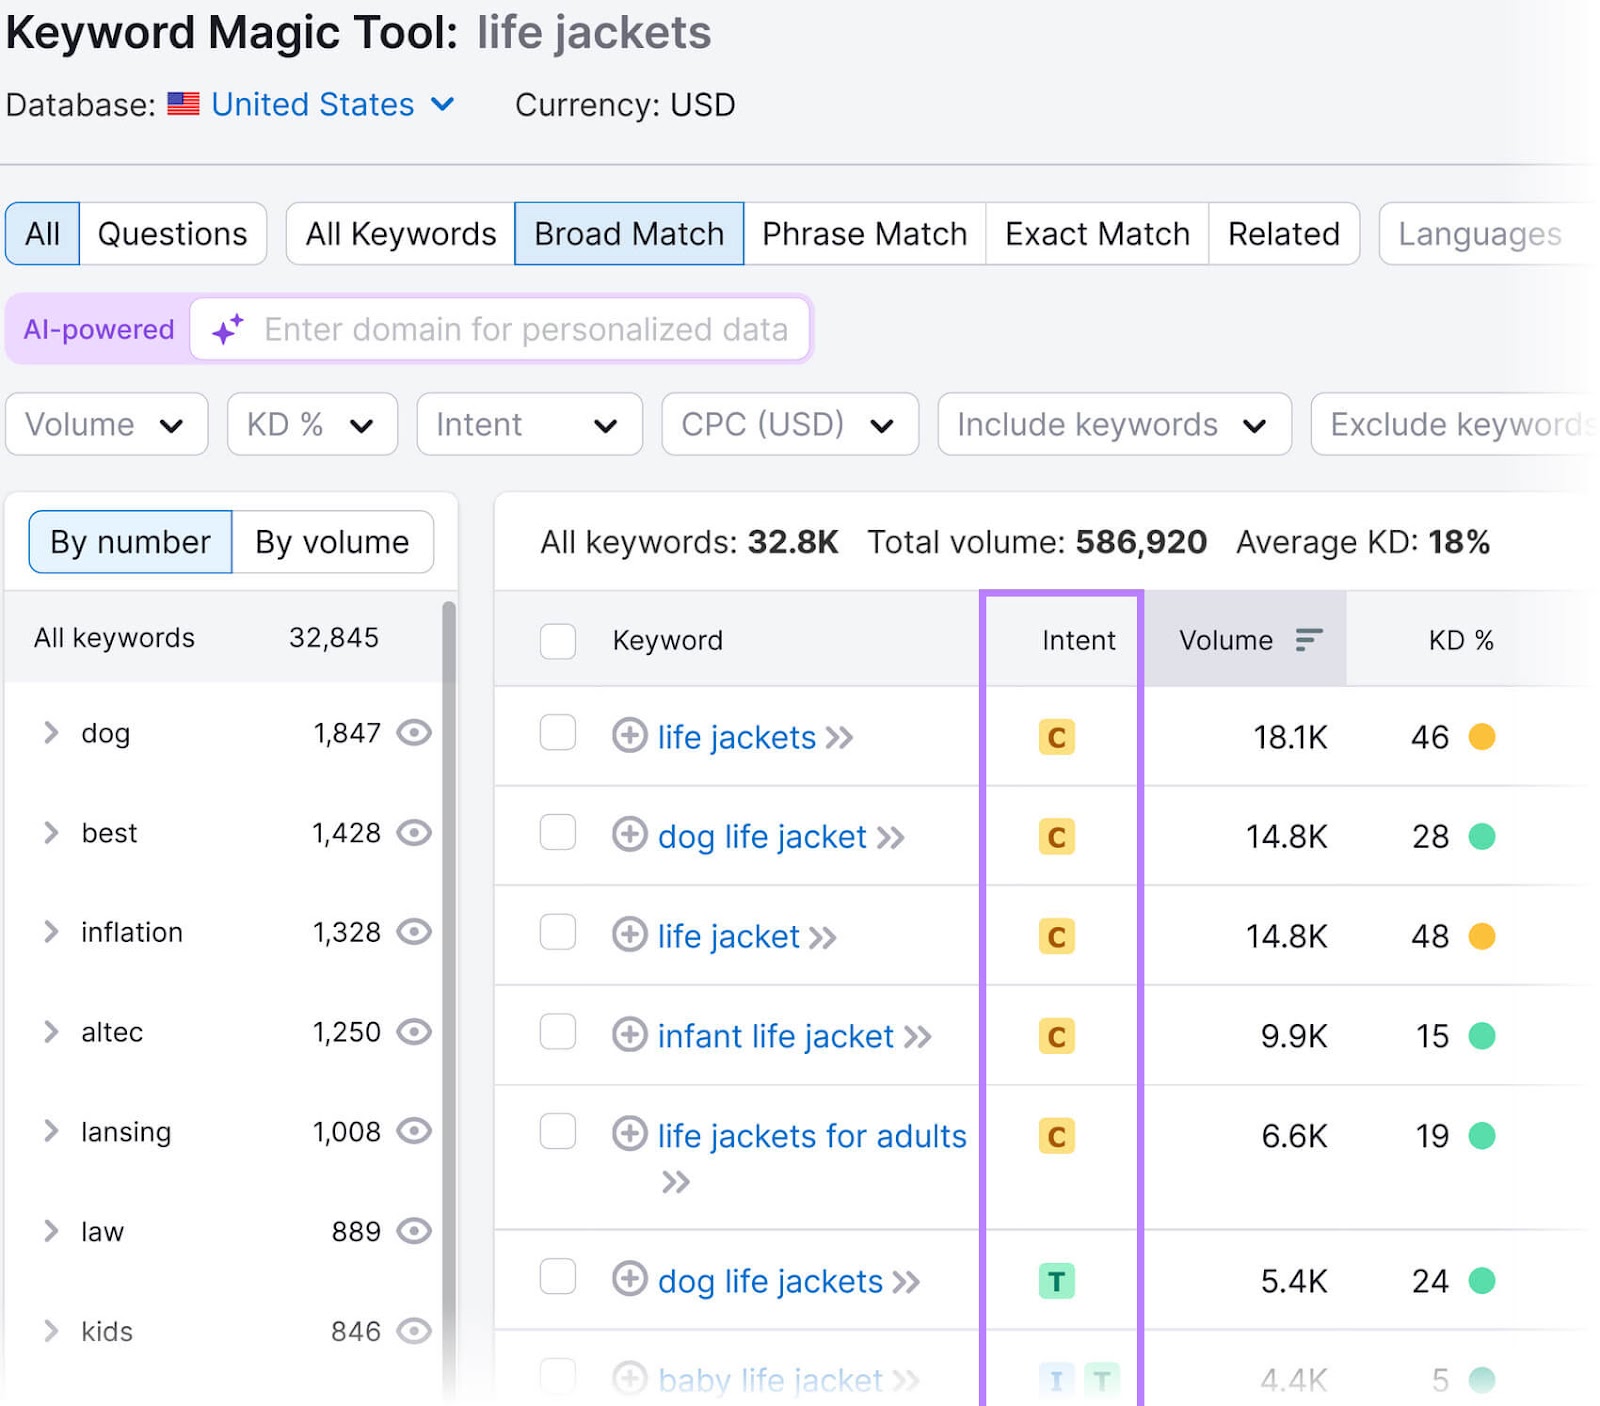 Keyword Magic Tool interface with keyword stats displayed in an organized layout and the "Intent" column in a purple box.